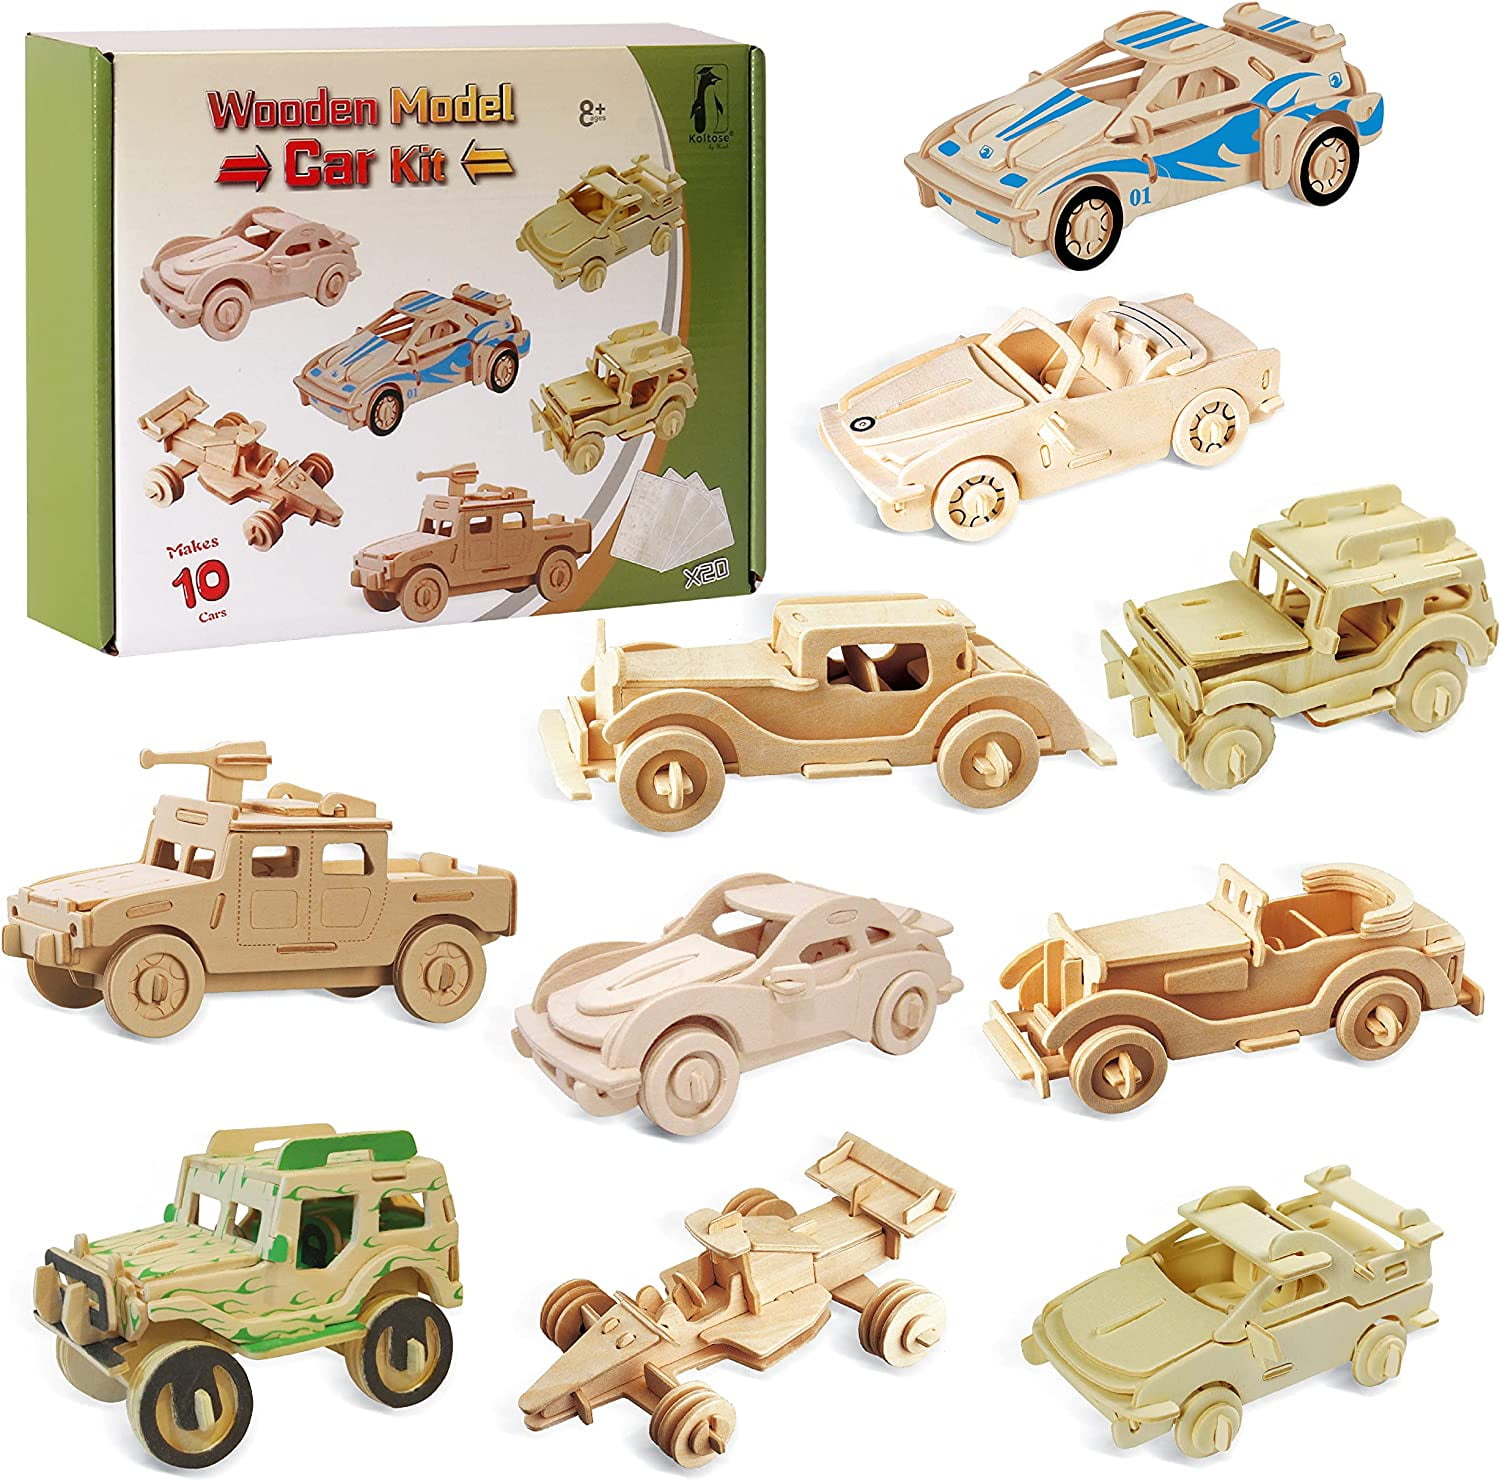 3D Wooden Puzzle - Wood Mechanical Tank Truck Model Kits - Coin Bank Crafts  Model - Wooden STEM DIY Brain Teaser Puzzles, Birthday for Kids and Adults